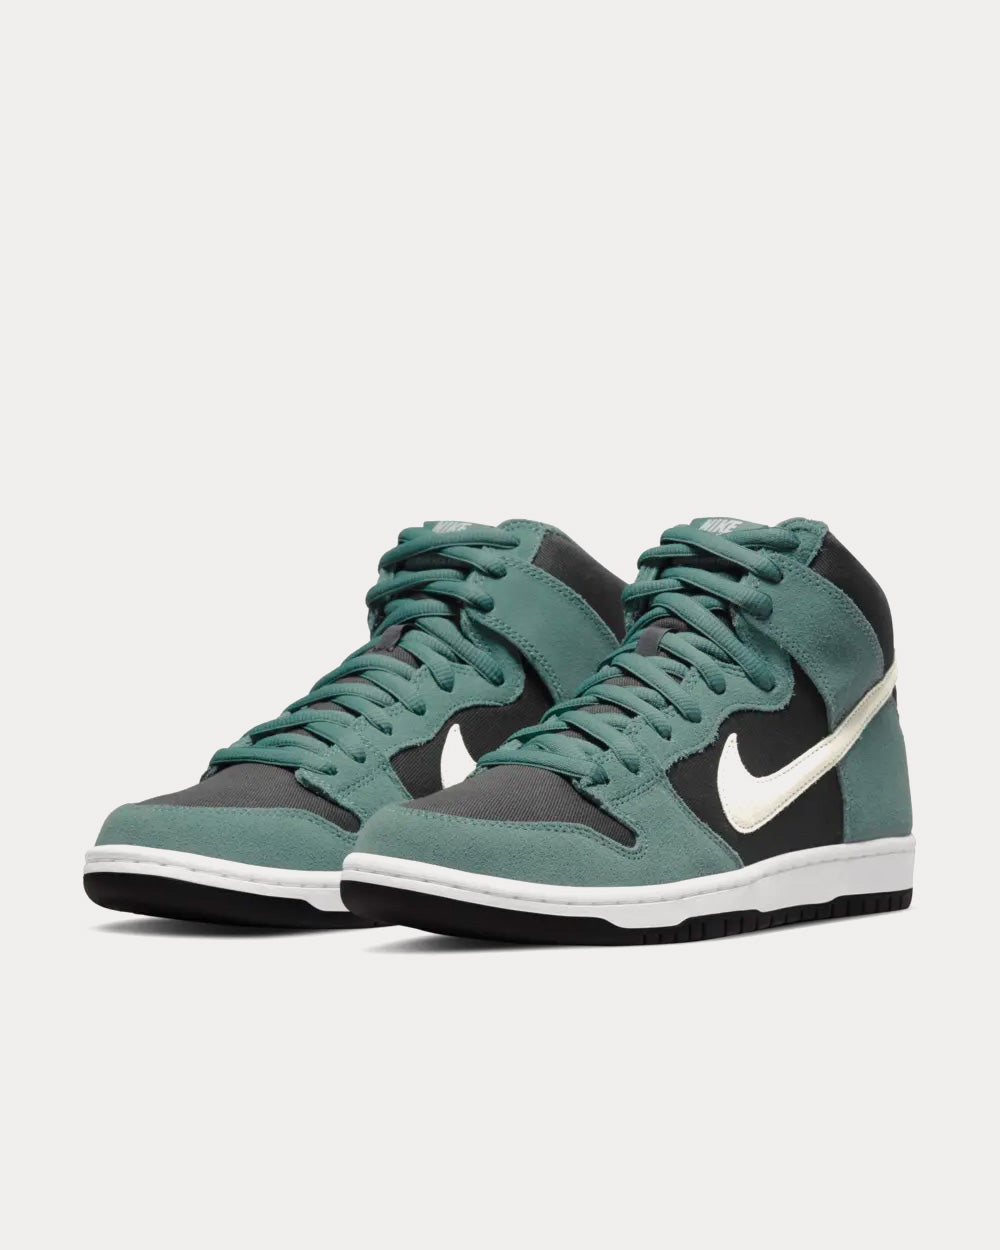 Nike - SB Dunk High Pro Mineral Slate Suede High Top Sneakers